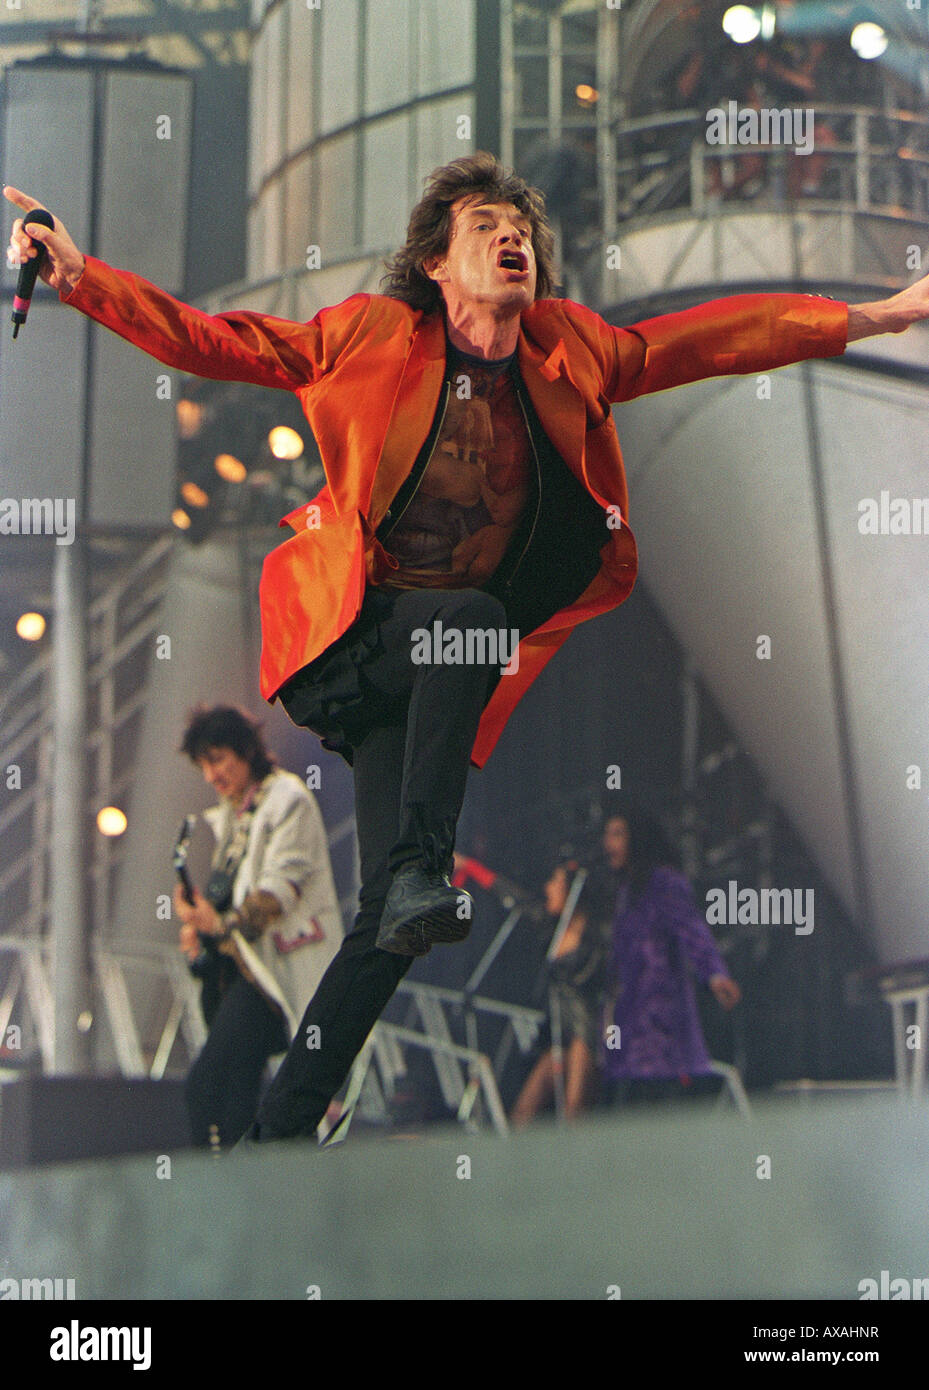 Mick Jagger,( Rolling Stones), (1995 Voodoo Lounge tour), lo Stadio di Wembley a Londra) Foto Stock